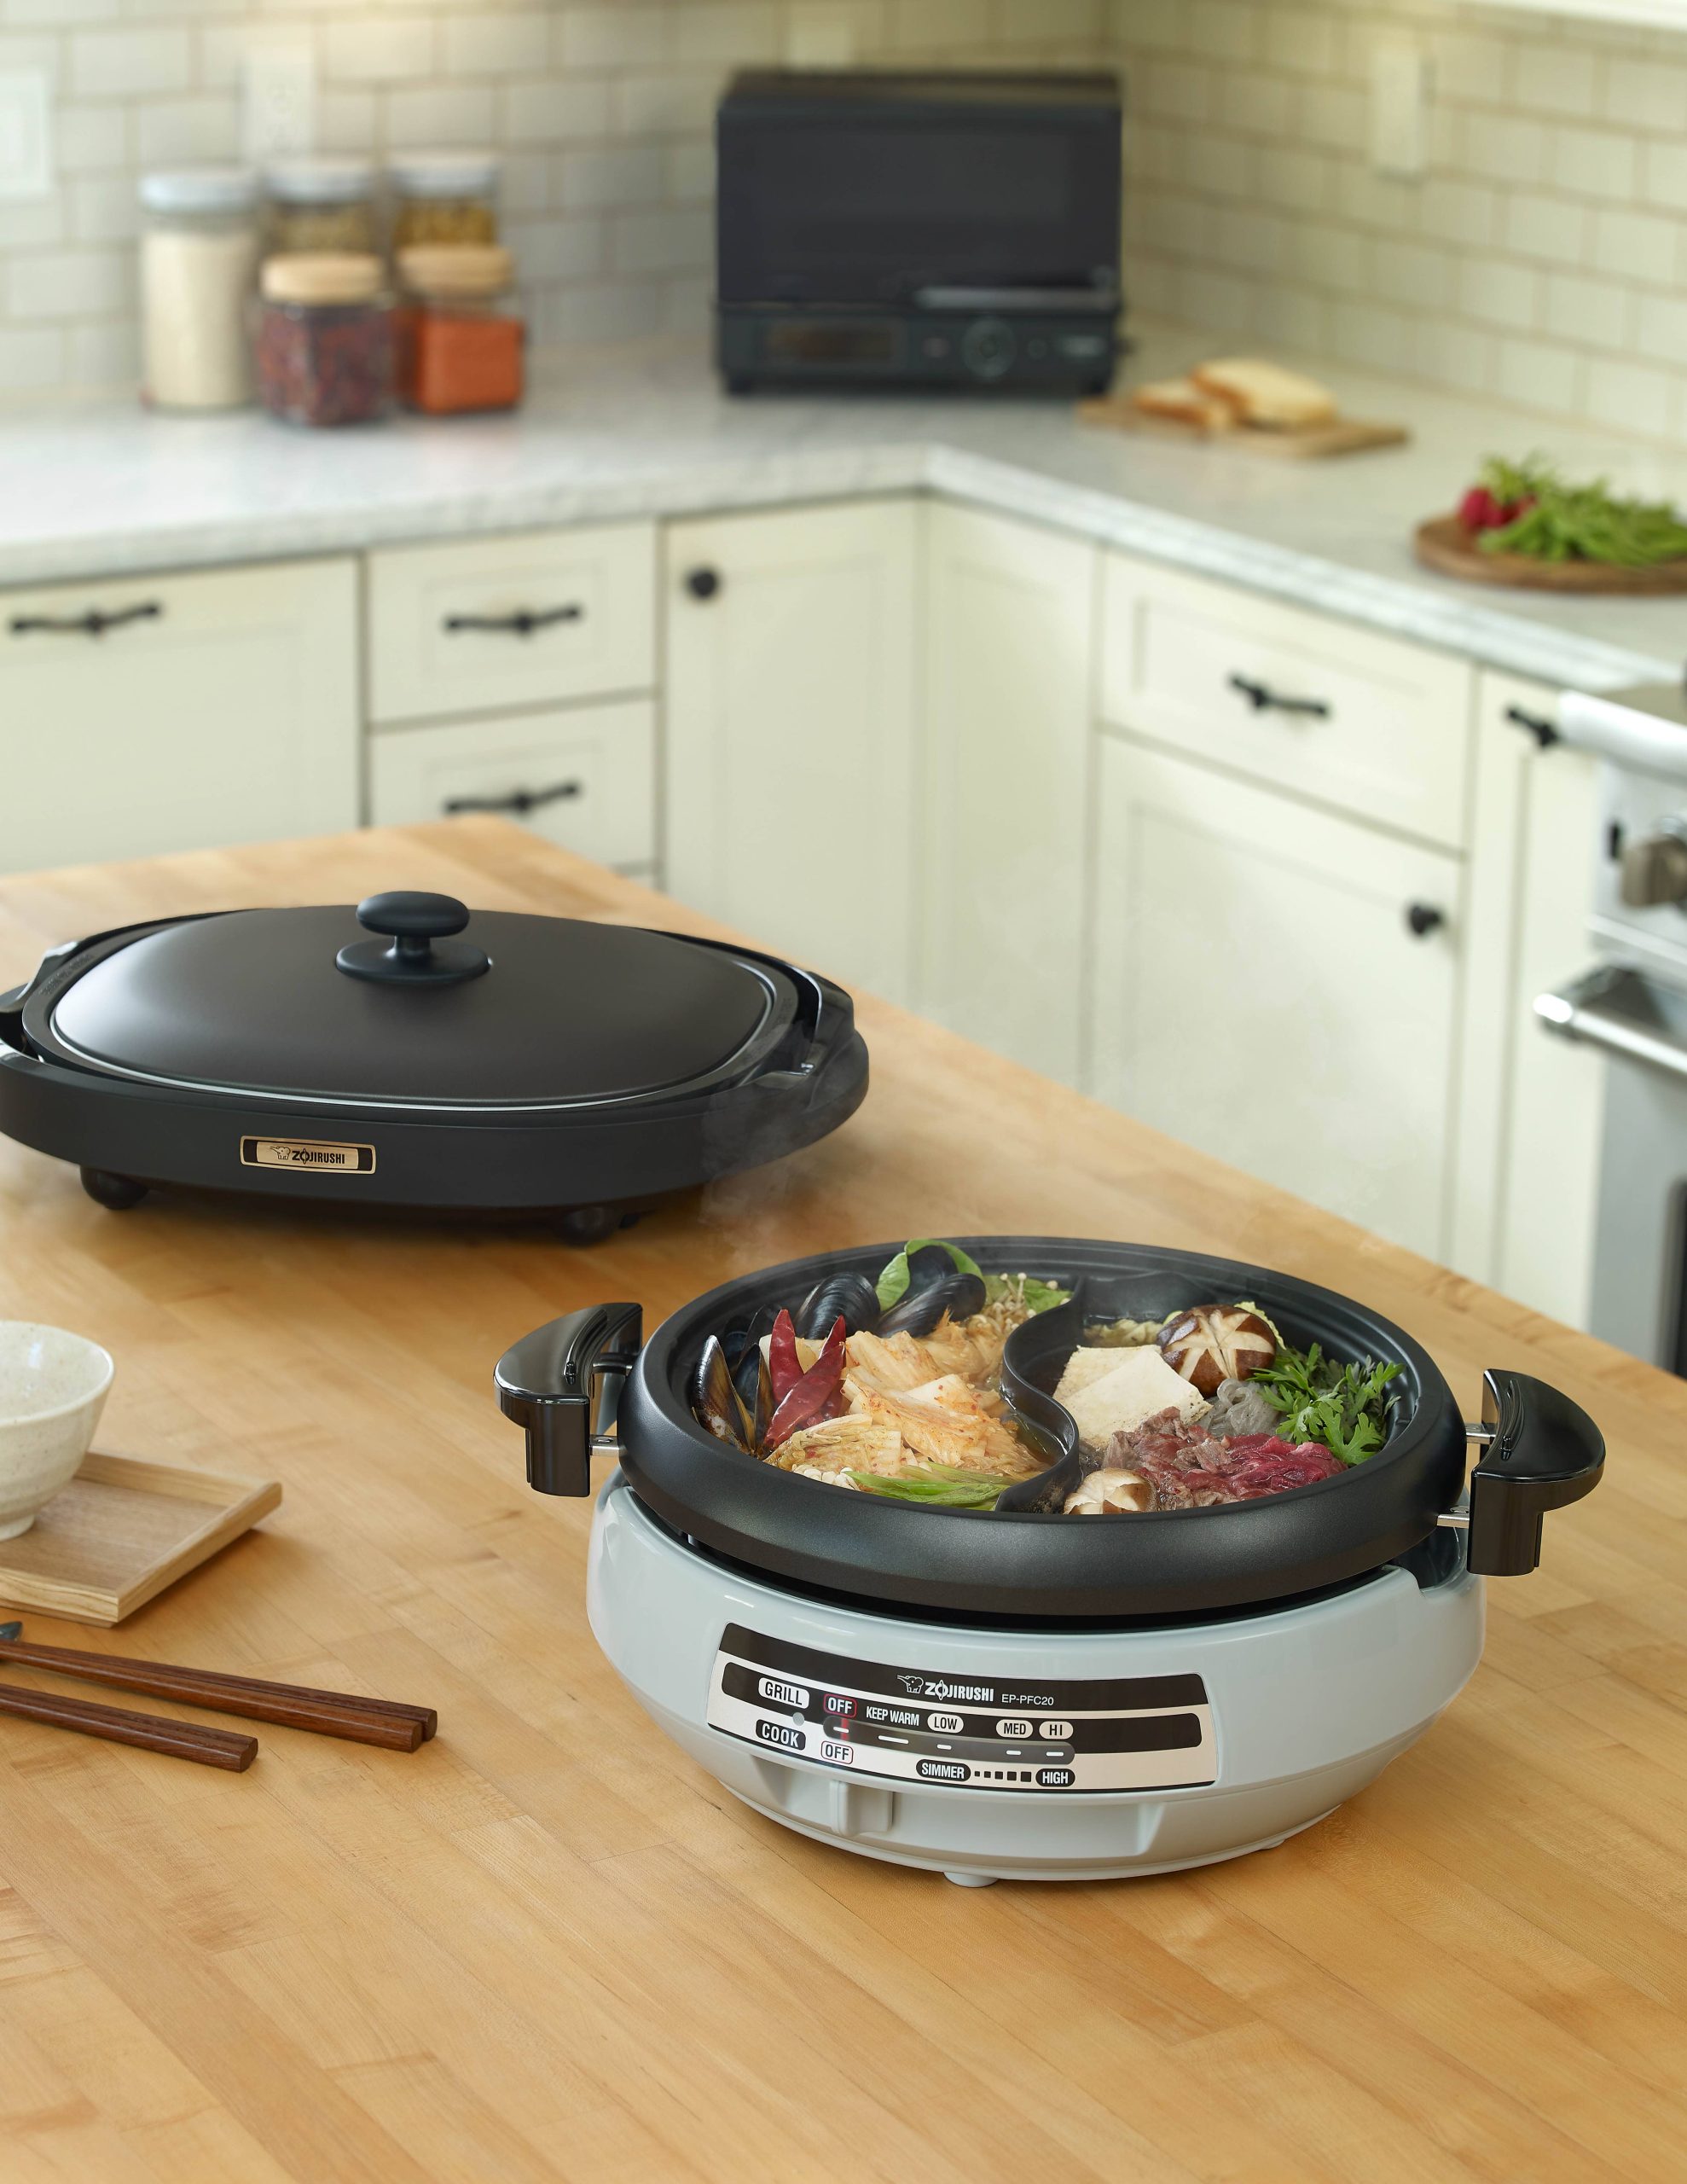 Warm Up This Winter by Cooking in These Electric Hot Pots